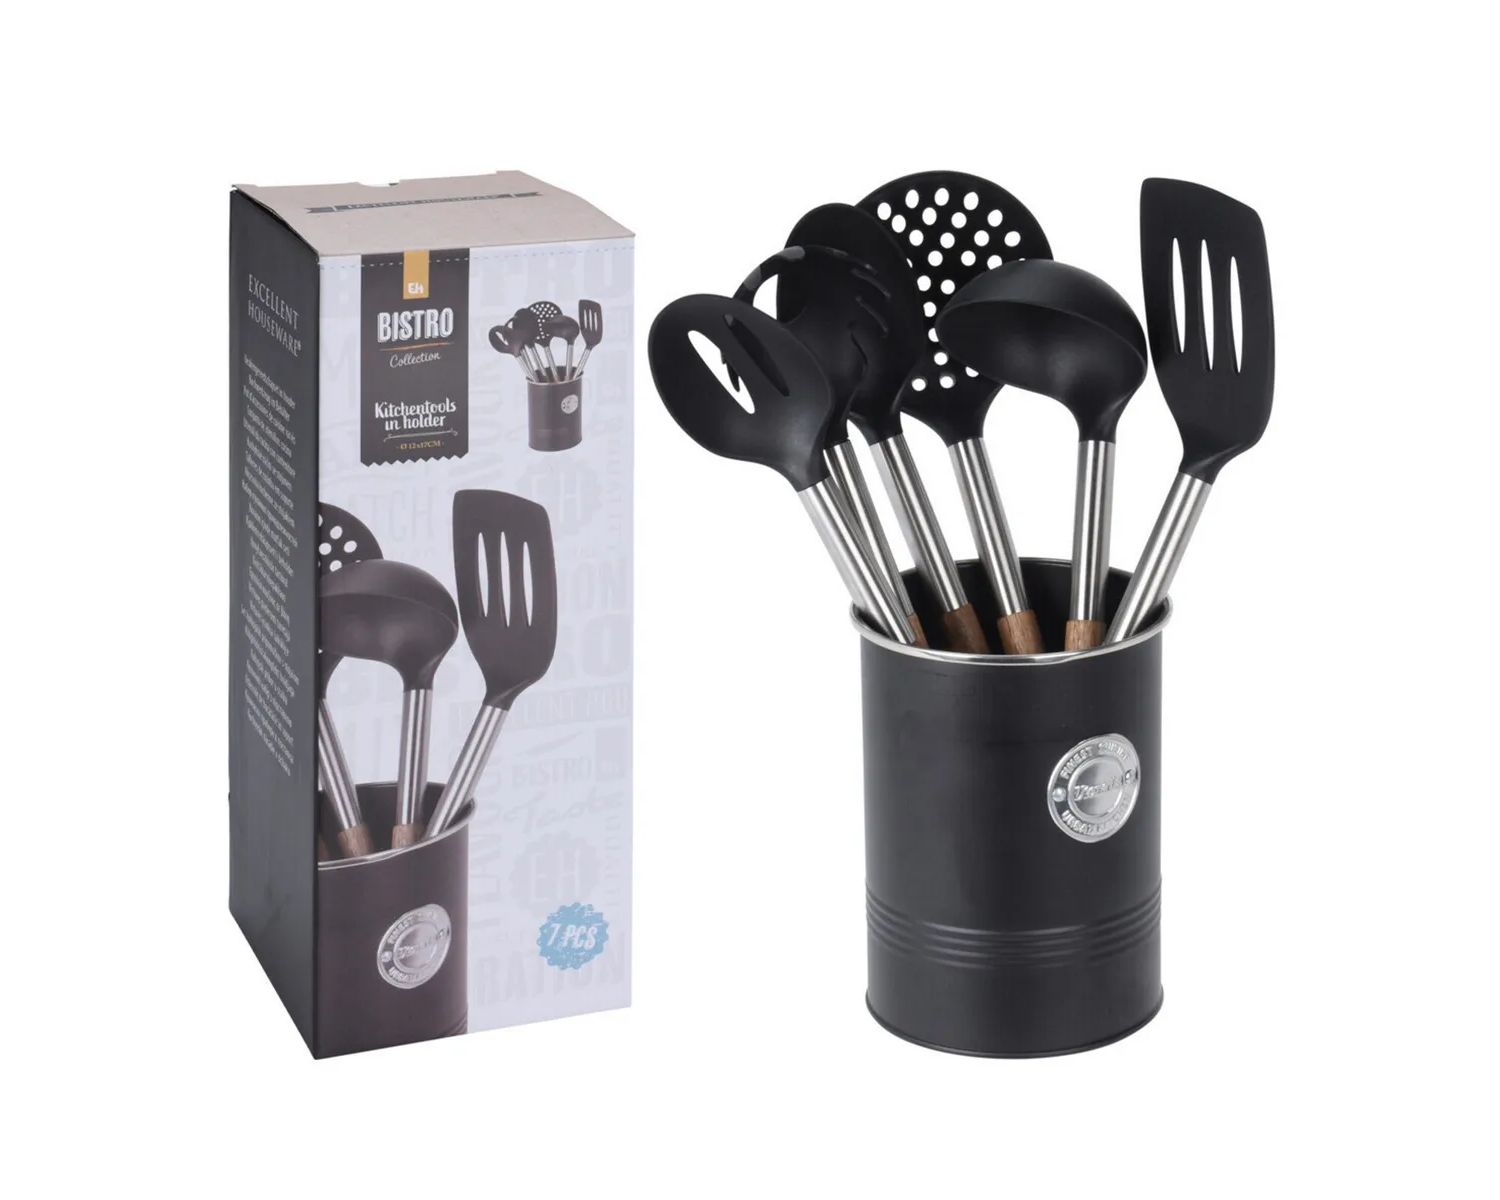 Spatula Set Review: The Perfect Kitchen Tool for Every Cooking Enthusiast